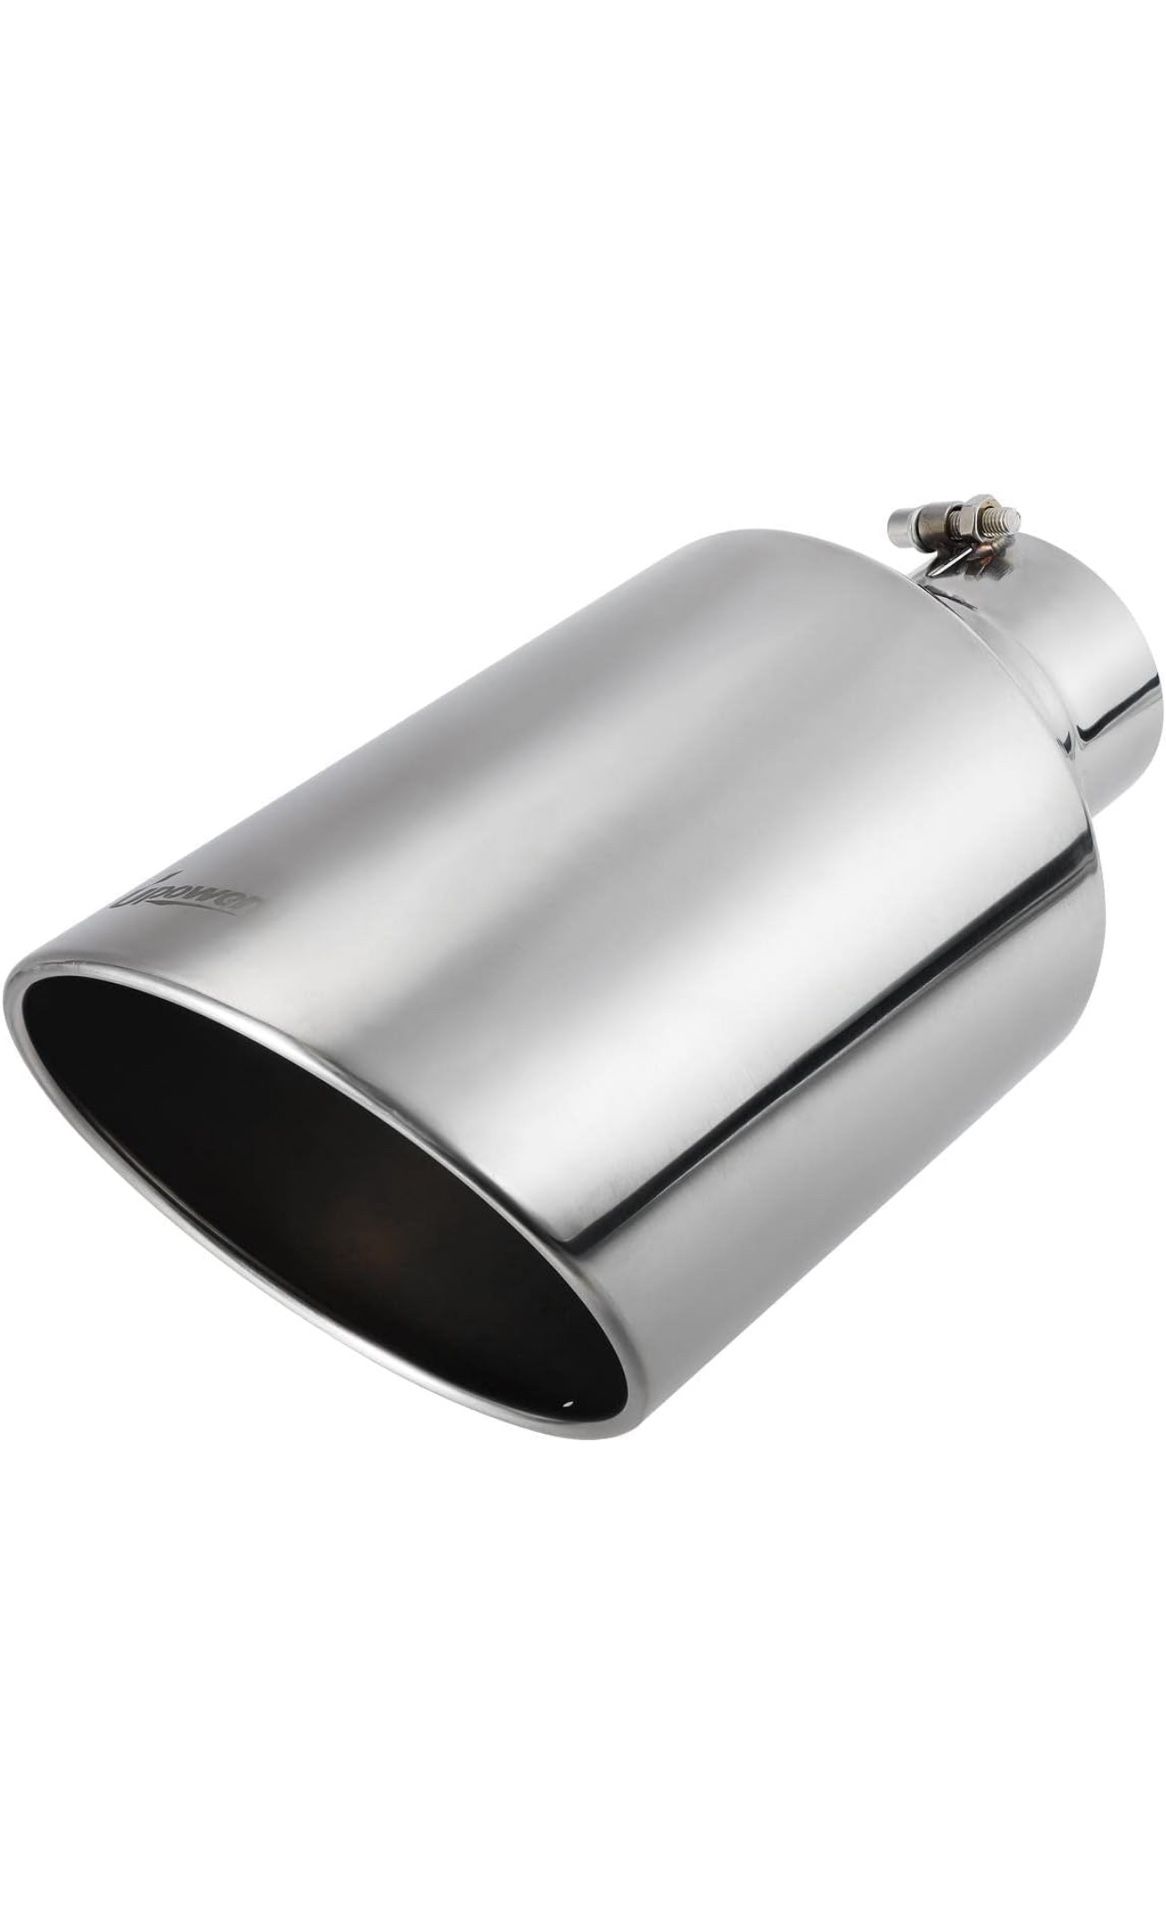 Upower 4 inch Inlet 7 inch Outlet Exhaust Tip Stainless Steel 4" to 7" Tail Pipe Tips 17" Long Bolt-On 45 Degree Angle Cut Universal for Car Truck